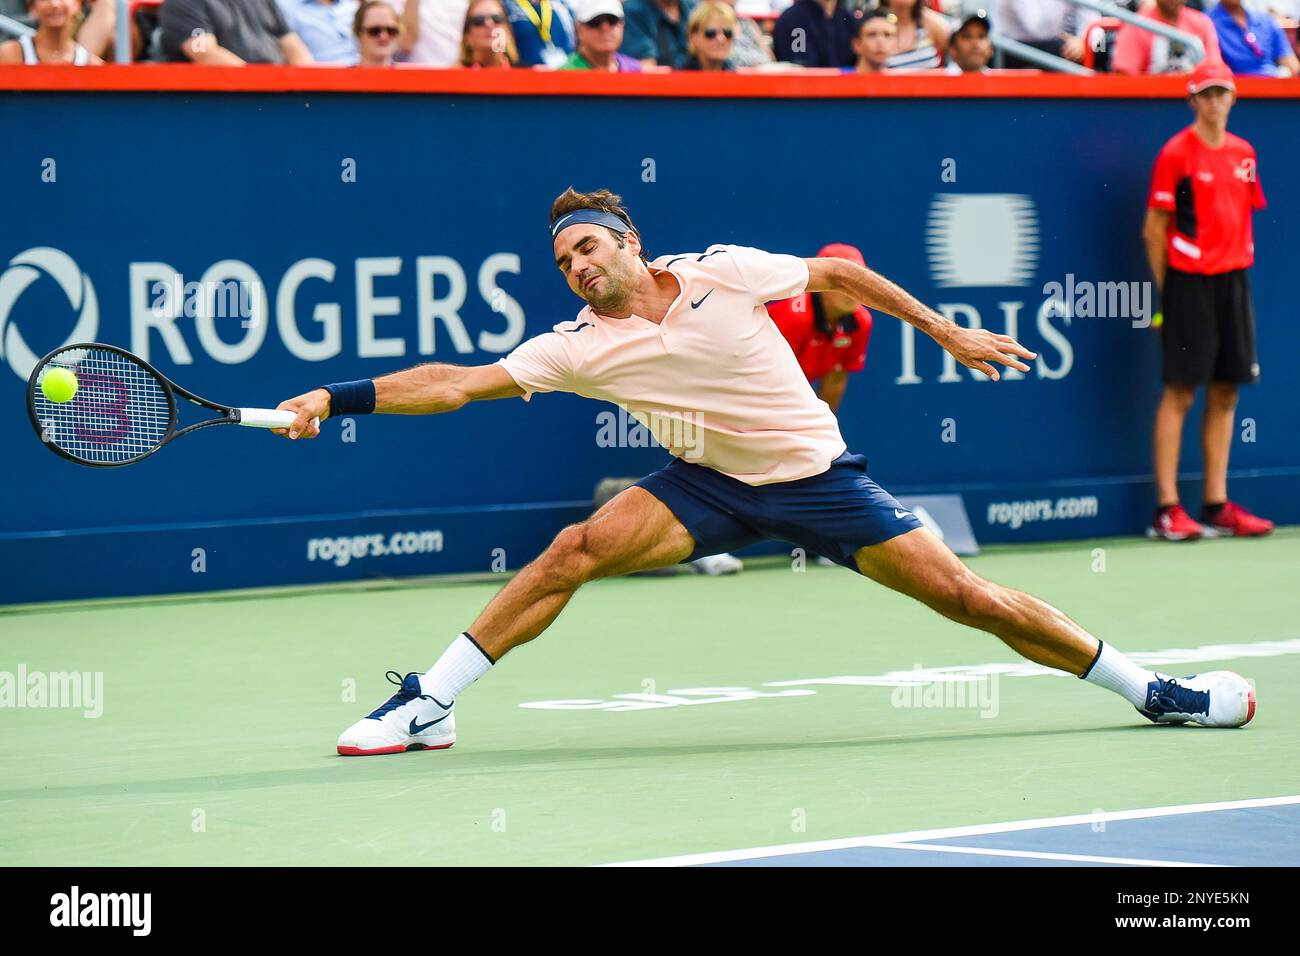 MONTREAL, QC - AUGUST 10: Roger Federer (SUI) stretches out then returns  the ball during his third round match at ATP Coupe Rogers on August 10,  2017, at Uniprix Stadium in Montreal,